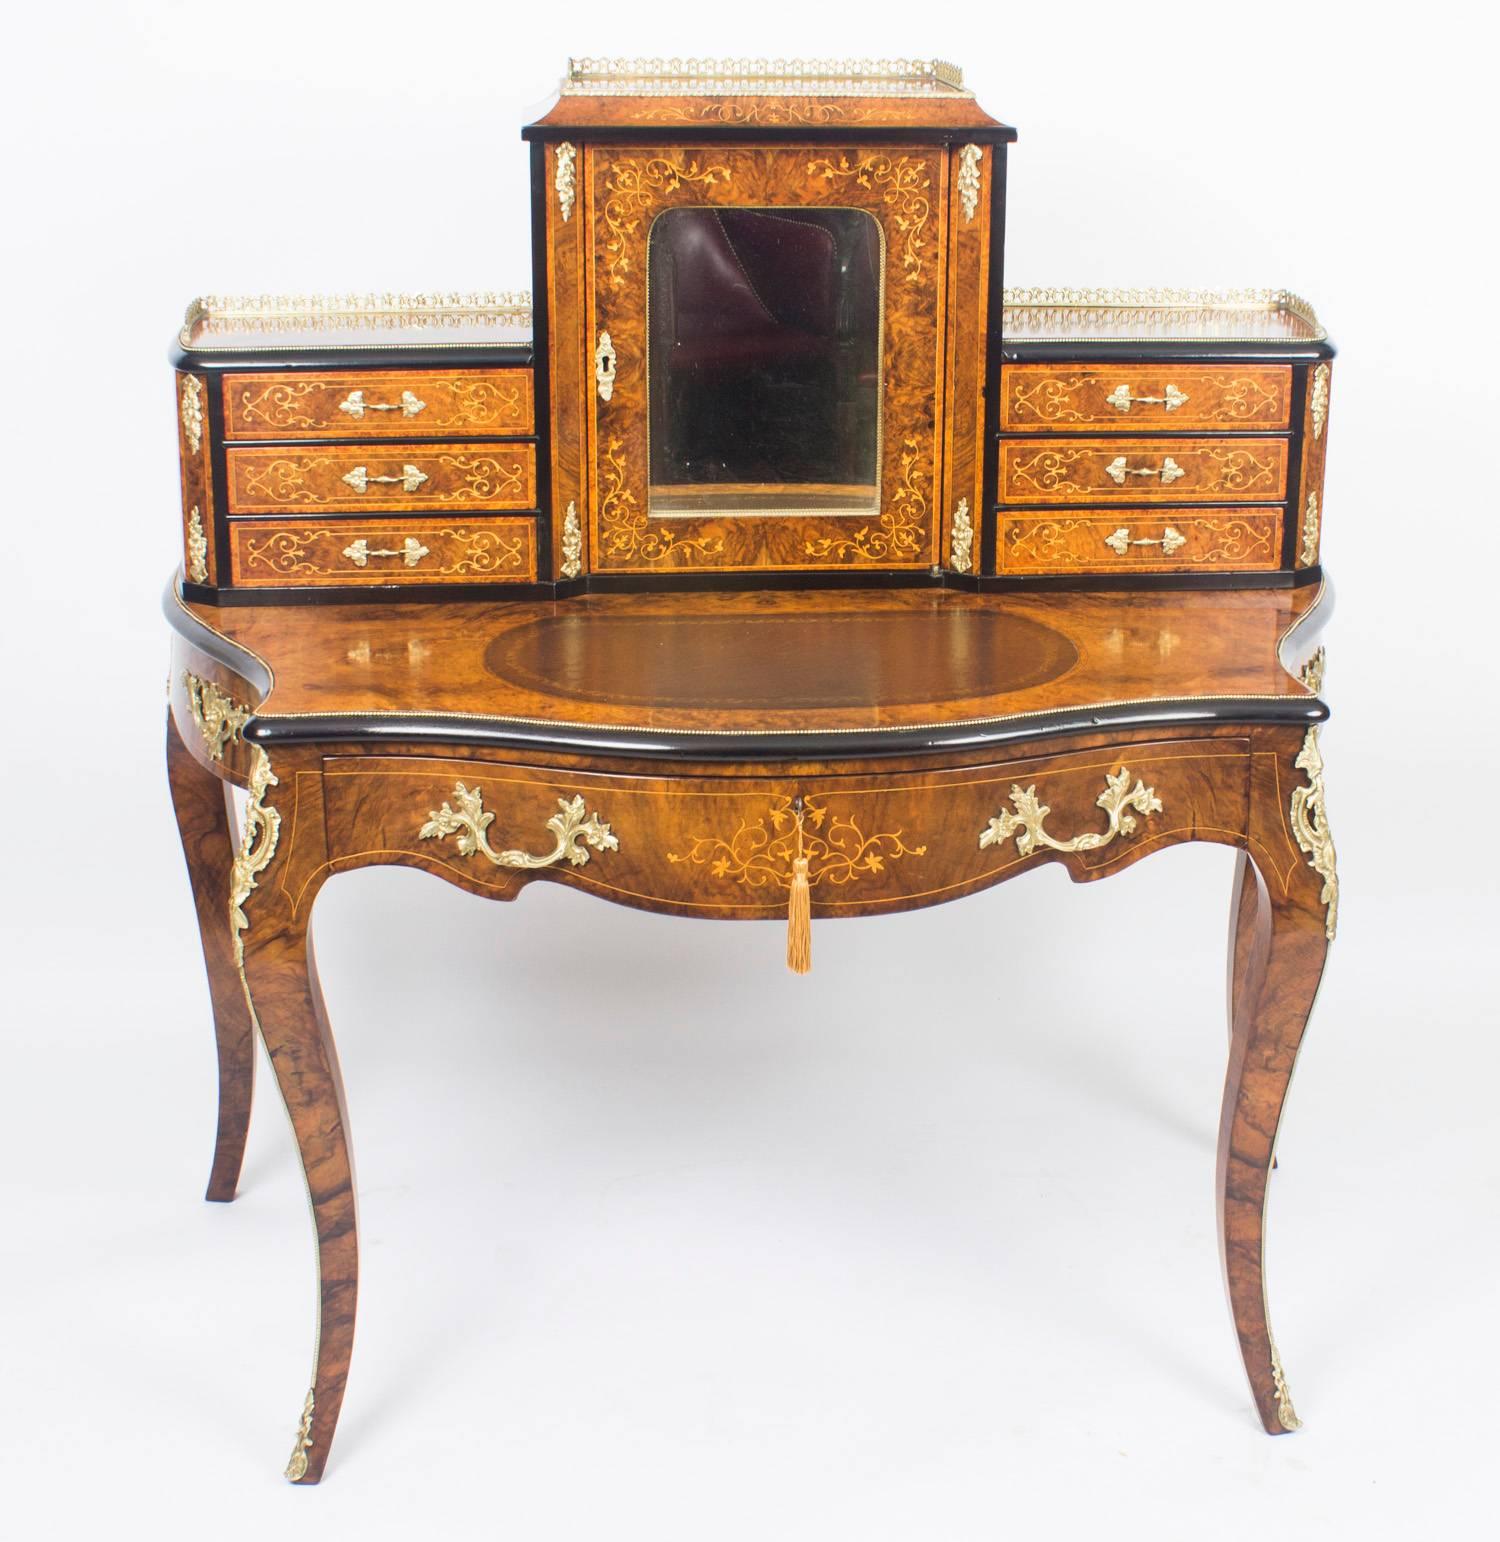 This is a gorgeous Victorian burr walnut and marquetry Bonheur Du Jour, or Ladies writing desk, circa 1860 in date. 

The superstructure comprises a large central bay with a mirror inset door and a three quarter brass gallery above. The door opens